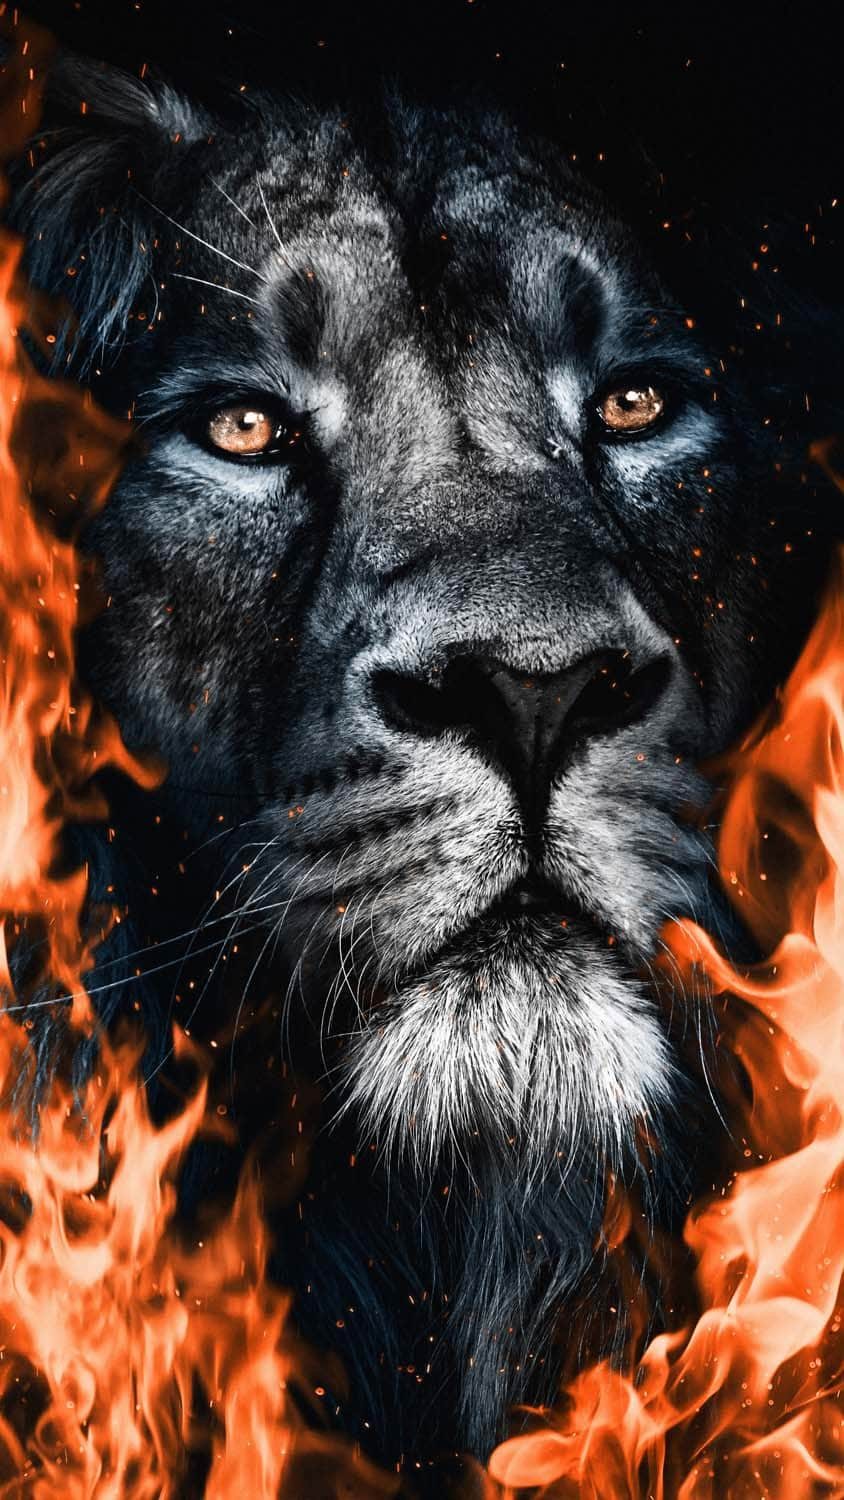 Lion Fire IPhone Wallpaper HD  IPhone Wallpapers